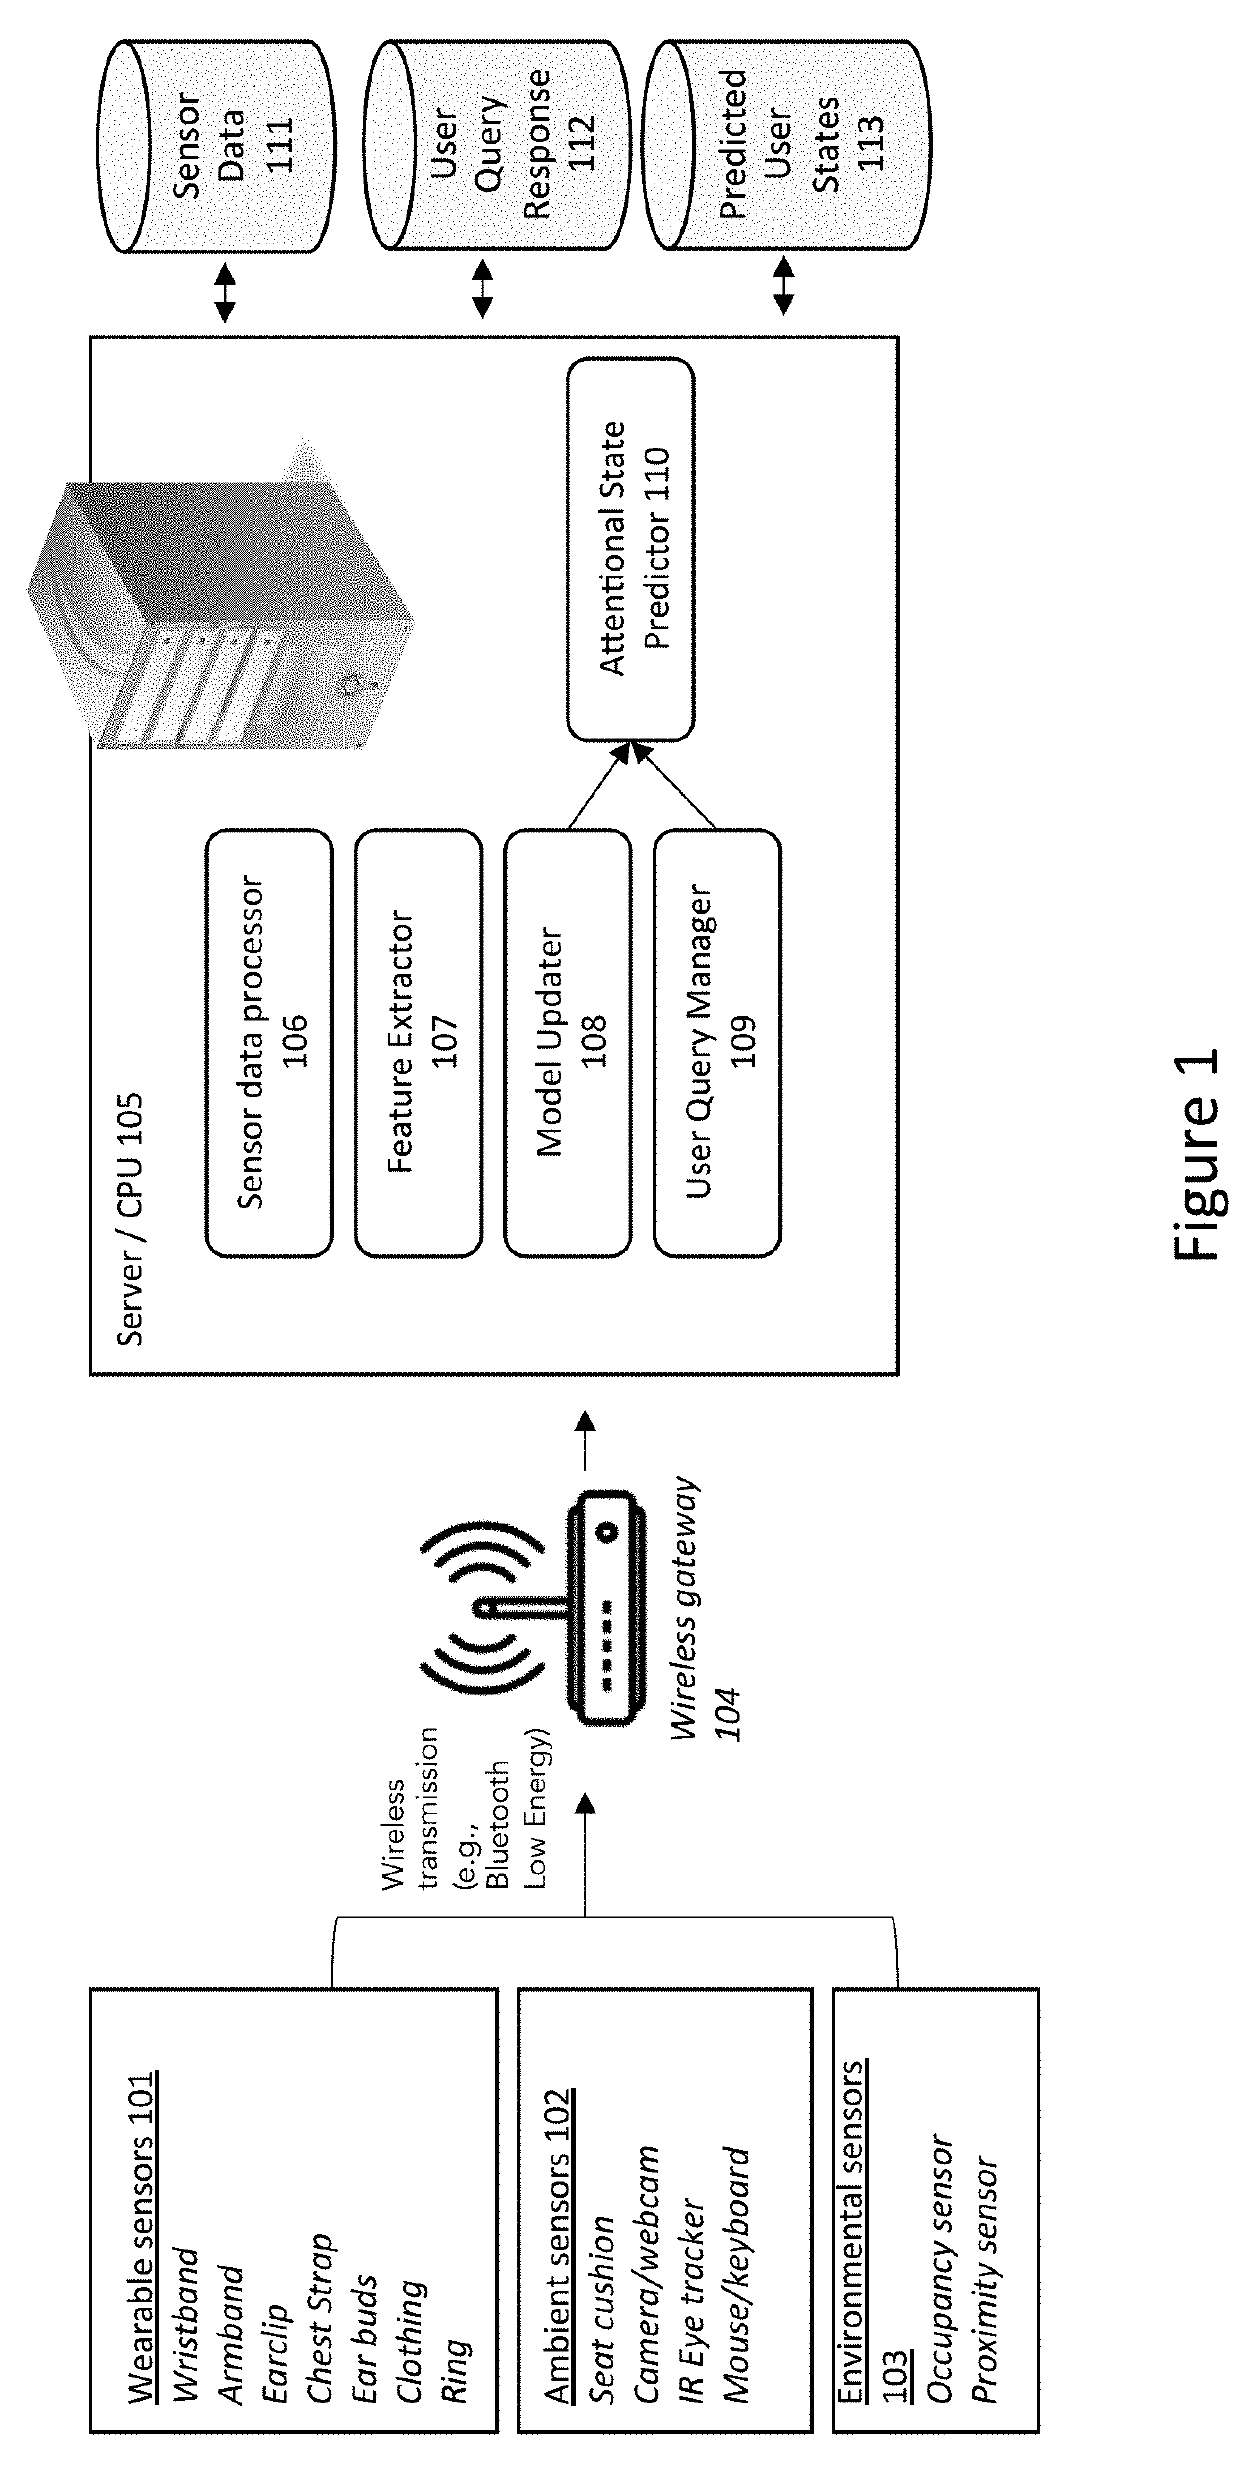 Systems and methods for physiological sensing for purposes of detecting persons affective focus state for optimizing productivity and work quality